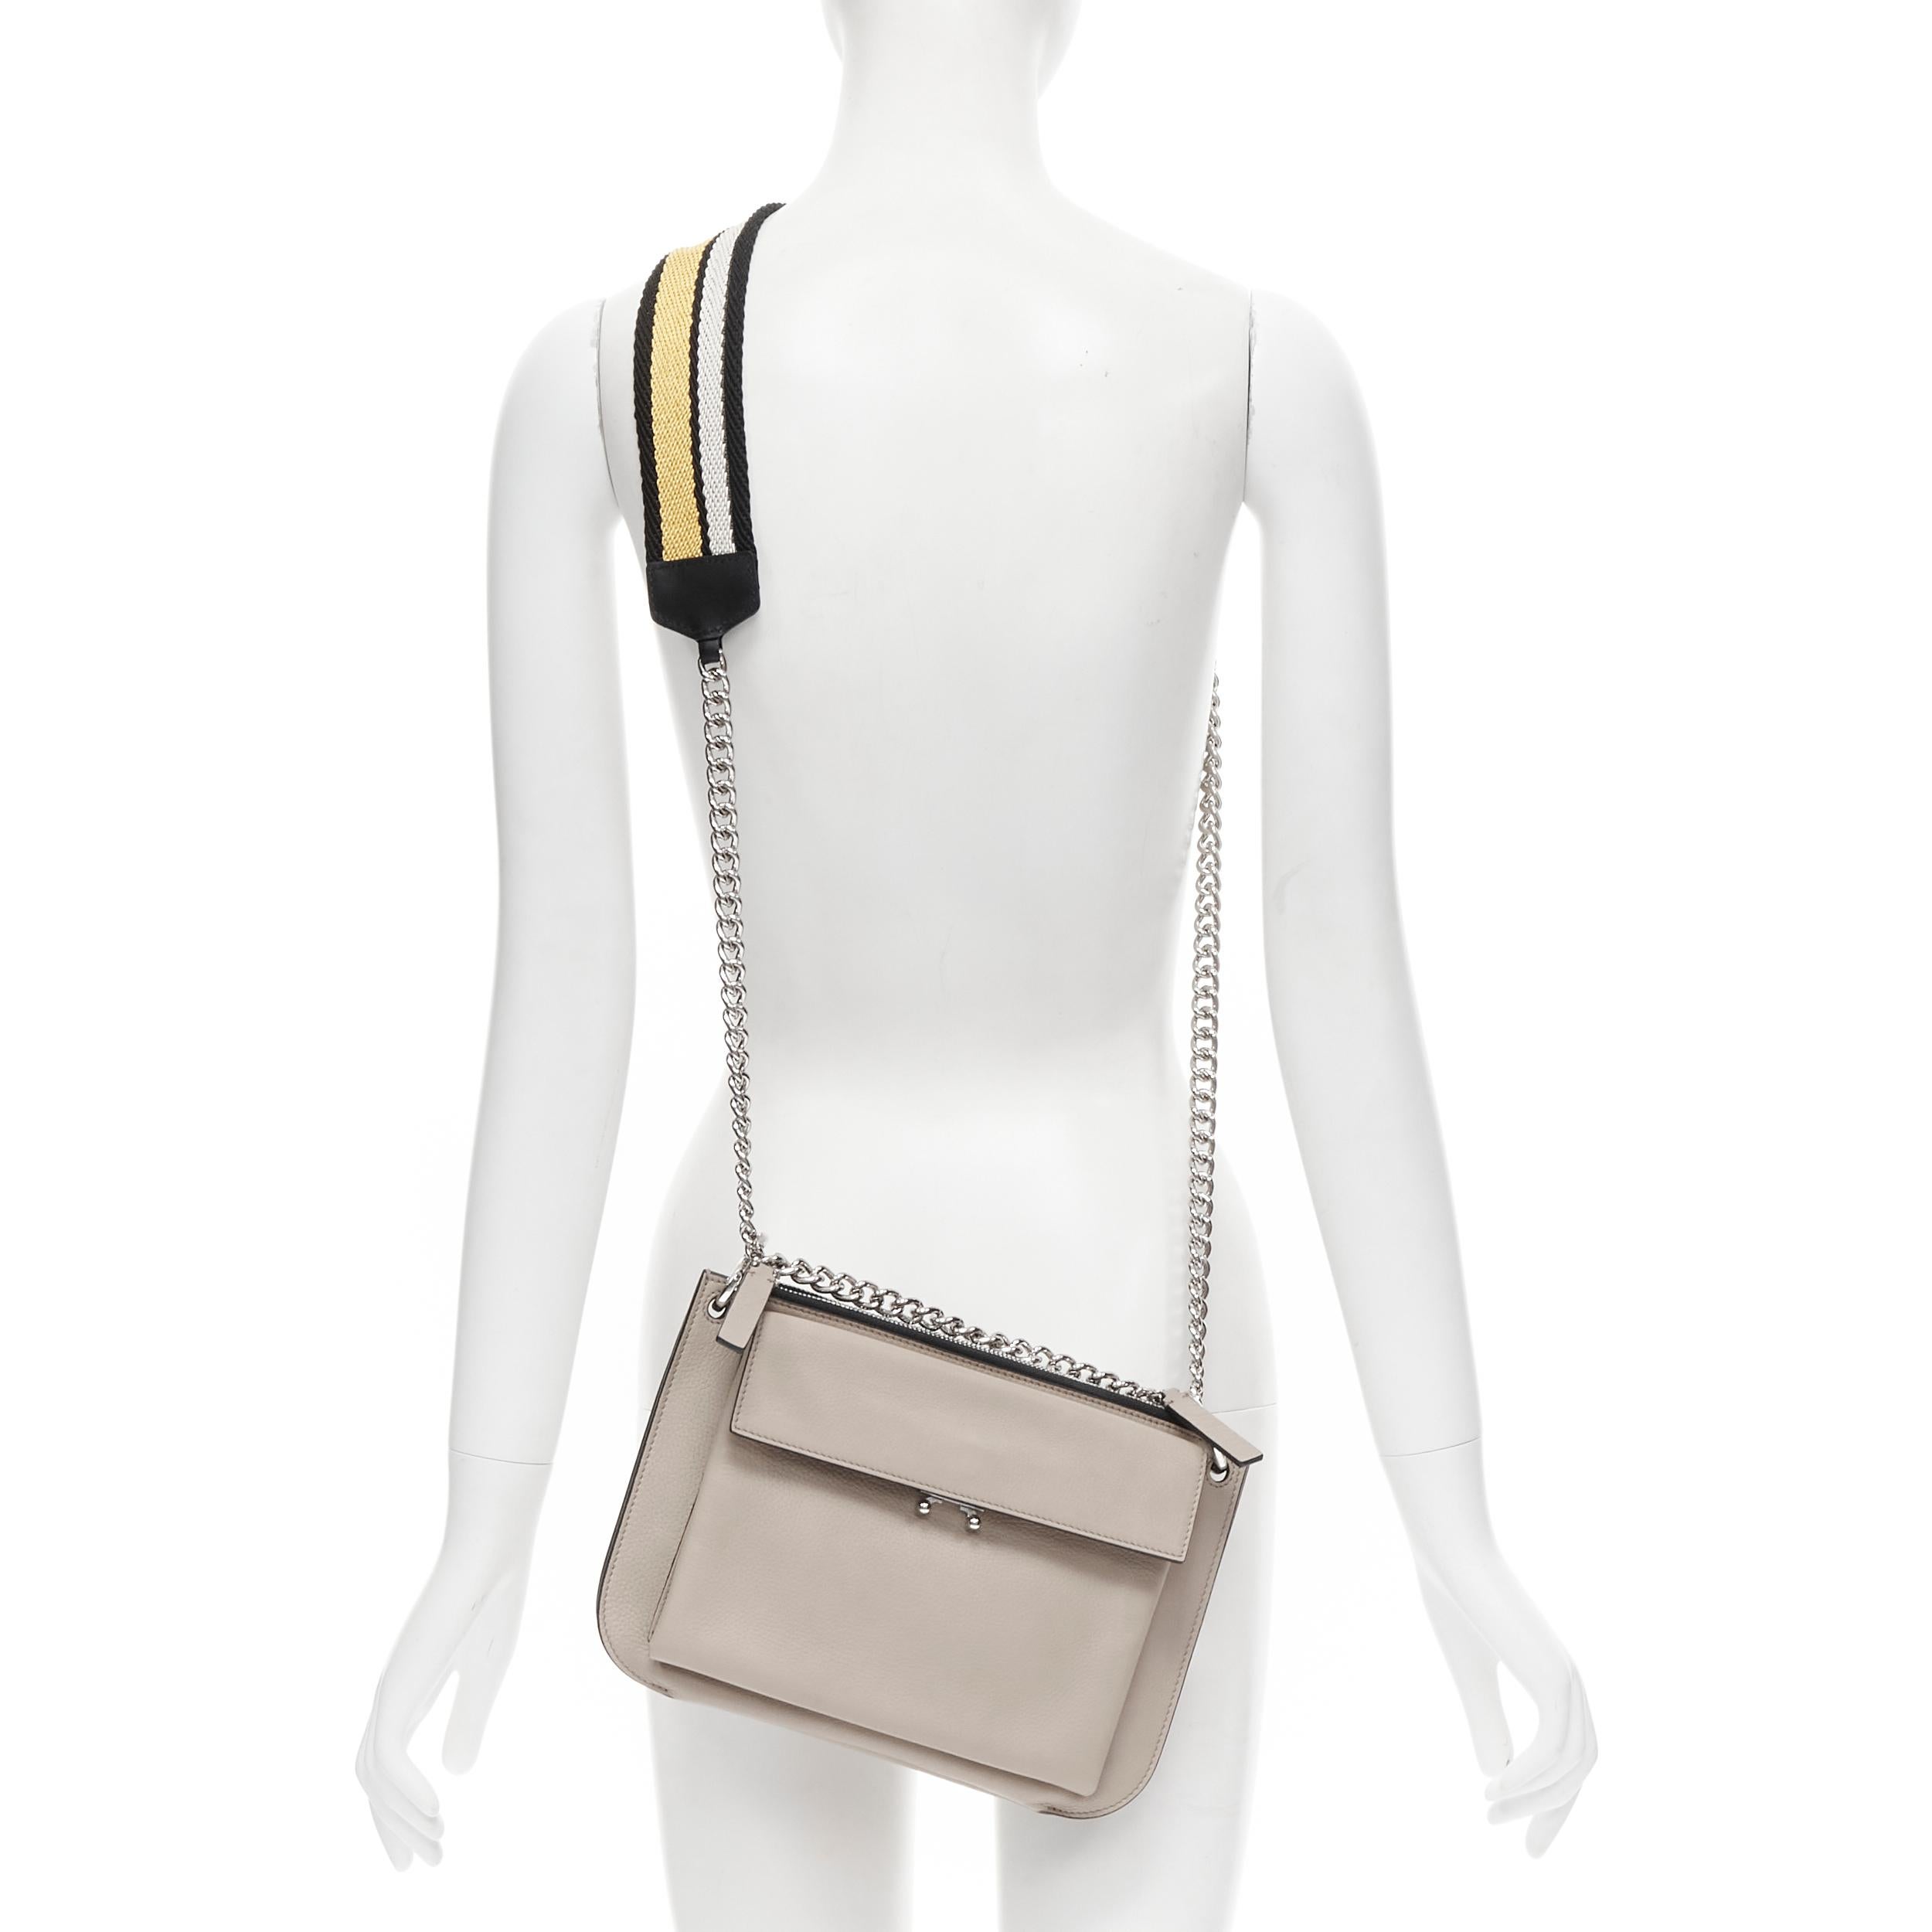 MARNI stone grey silver lock dual zip pouch chain sport strap crossbody bag 
Reference: CELG/A00032 
Brand: Marni 
Model: Dual pouch chain crossbody 
Material: Leather 
Color: Ecru 
Pattern: Solid 
Closure: Zip 
Extra Detail: Metal clasp lock on